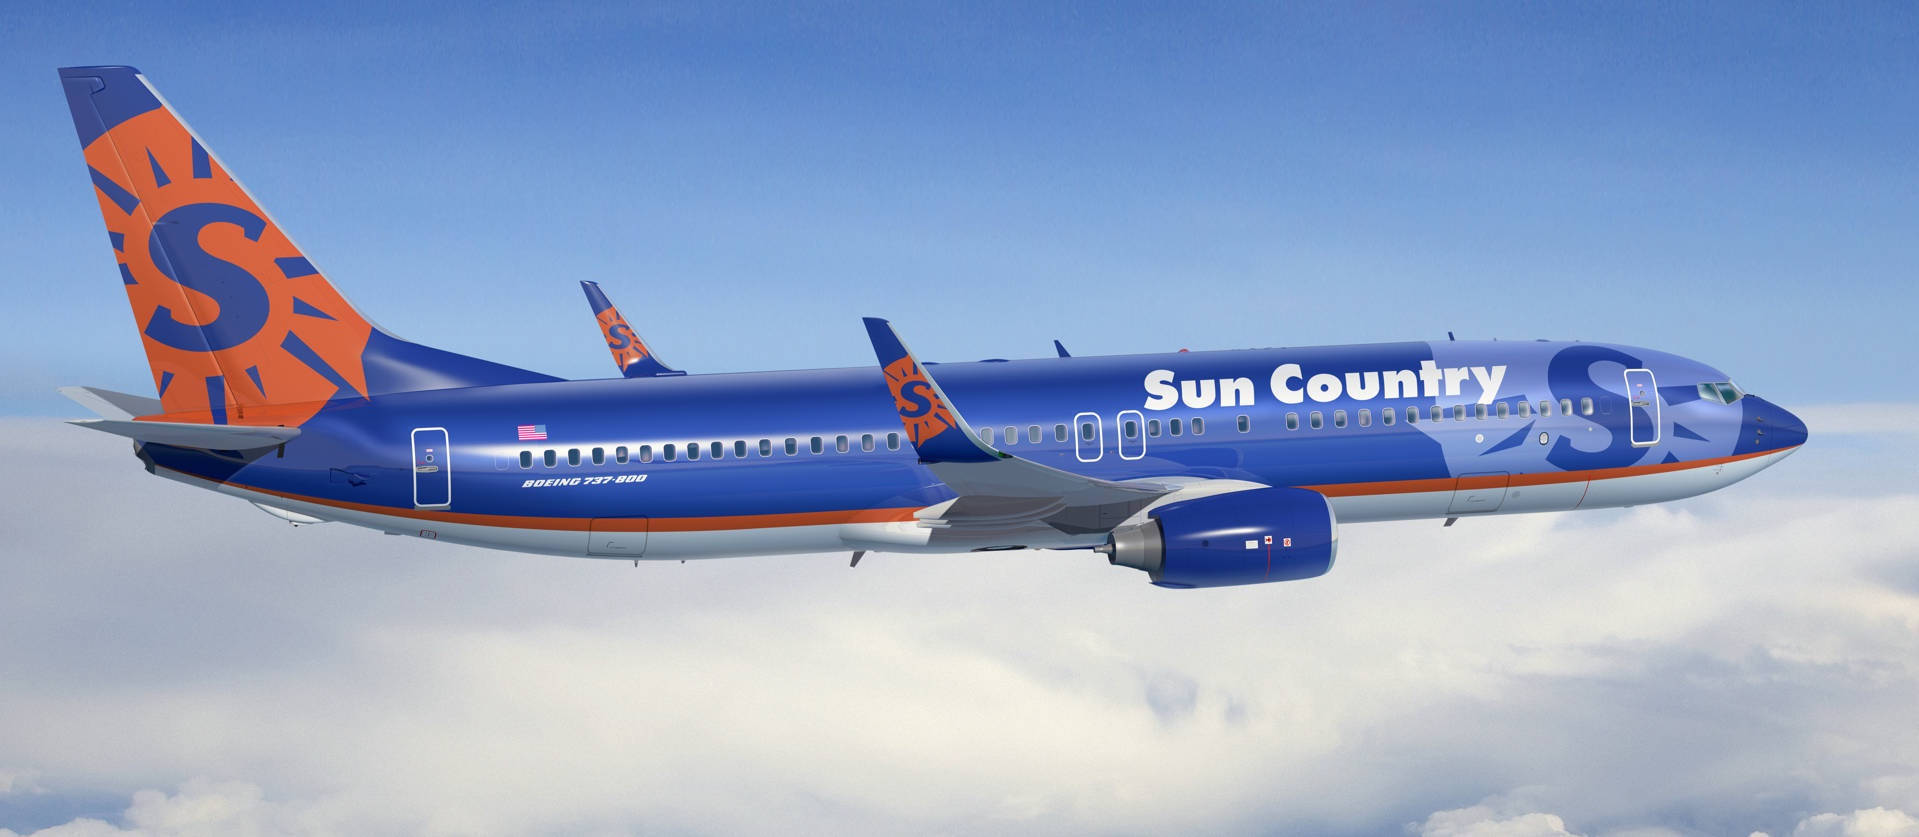 Sun Country Aircraft Above Clouds Wallpaper